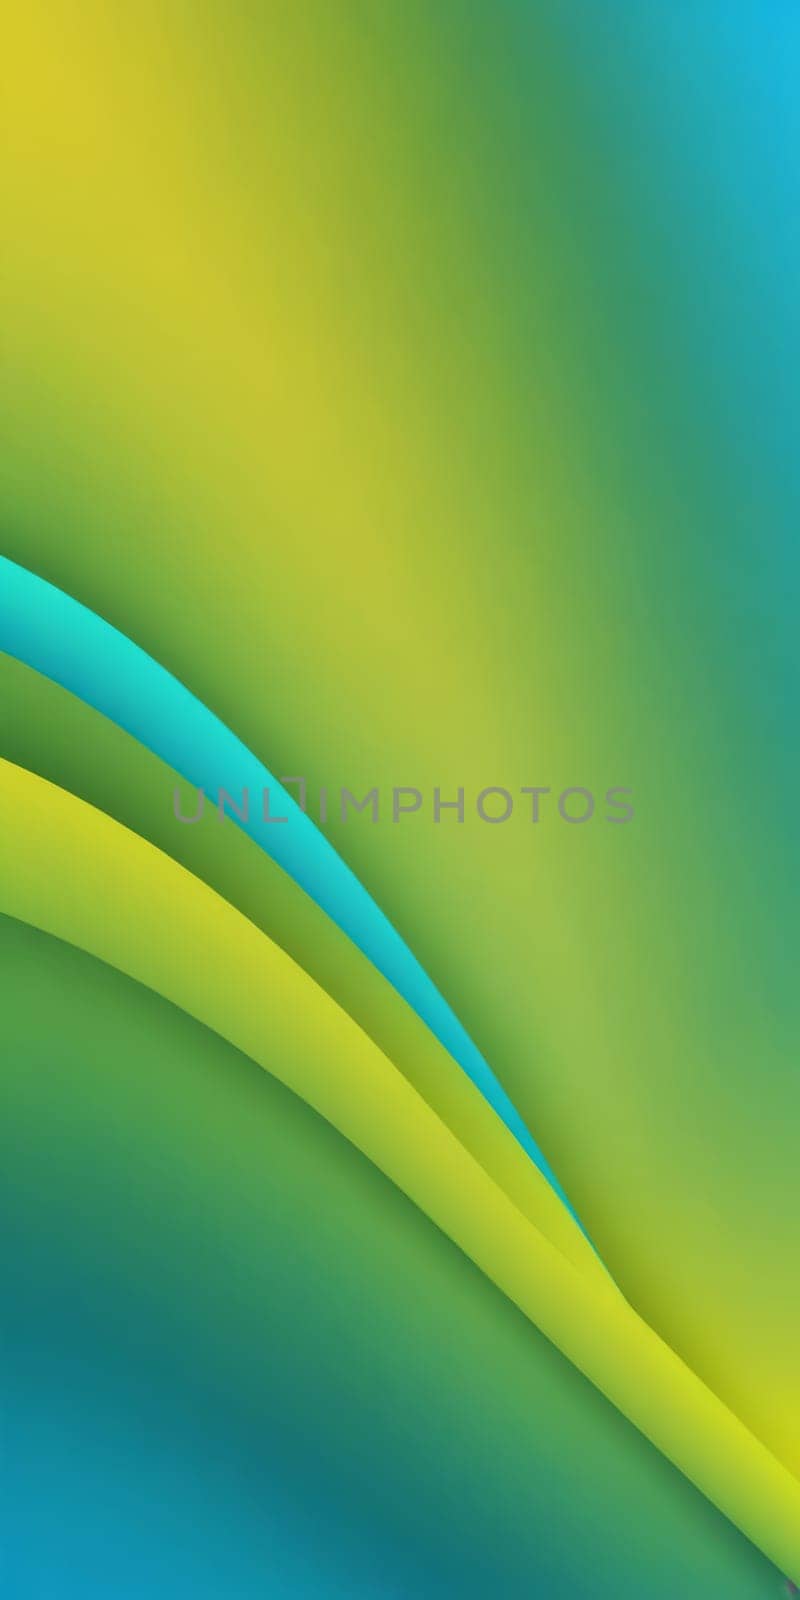 Multilobed Shapes in Aqua Chartreuse by nkotlyar